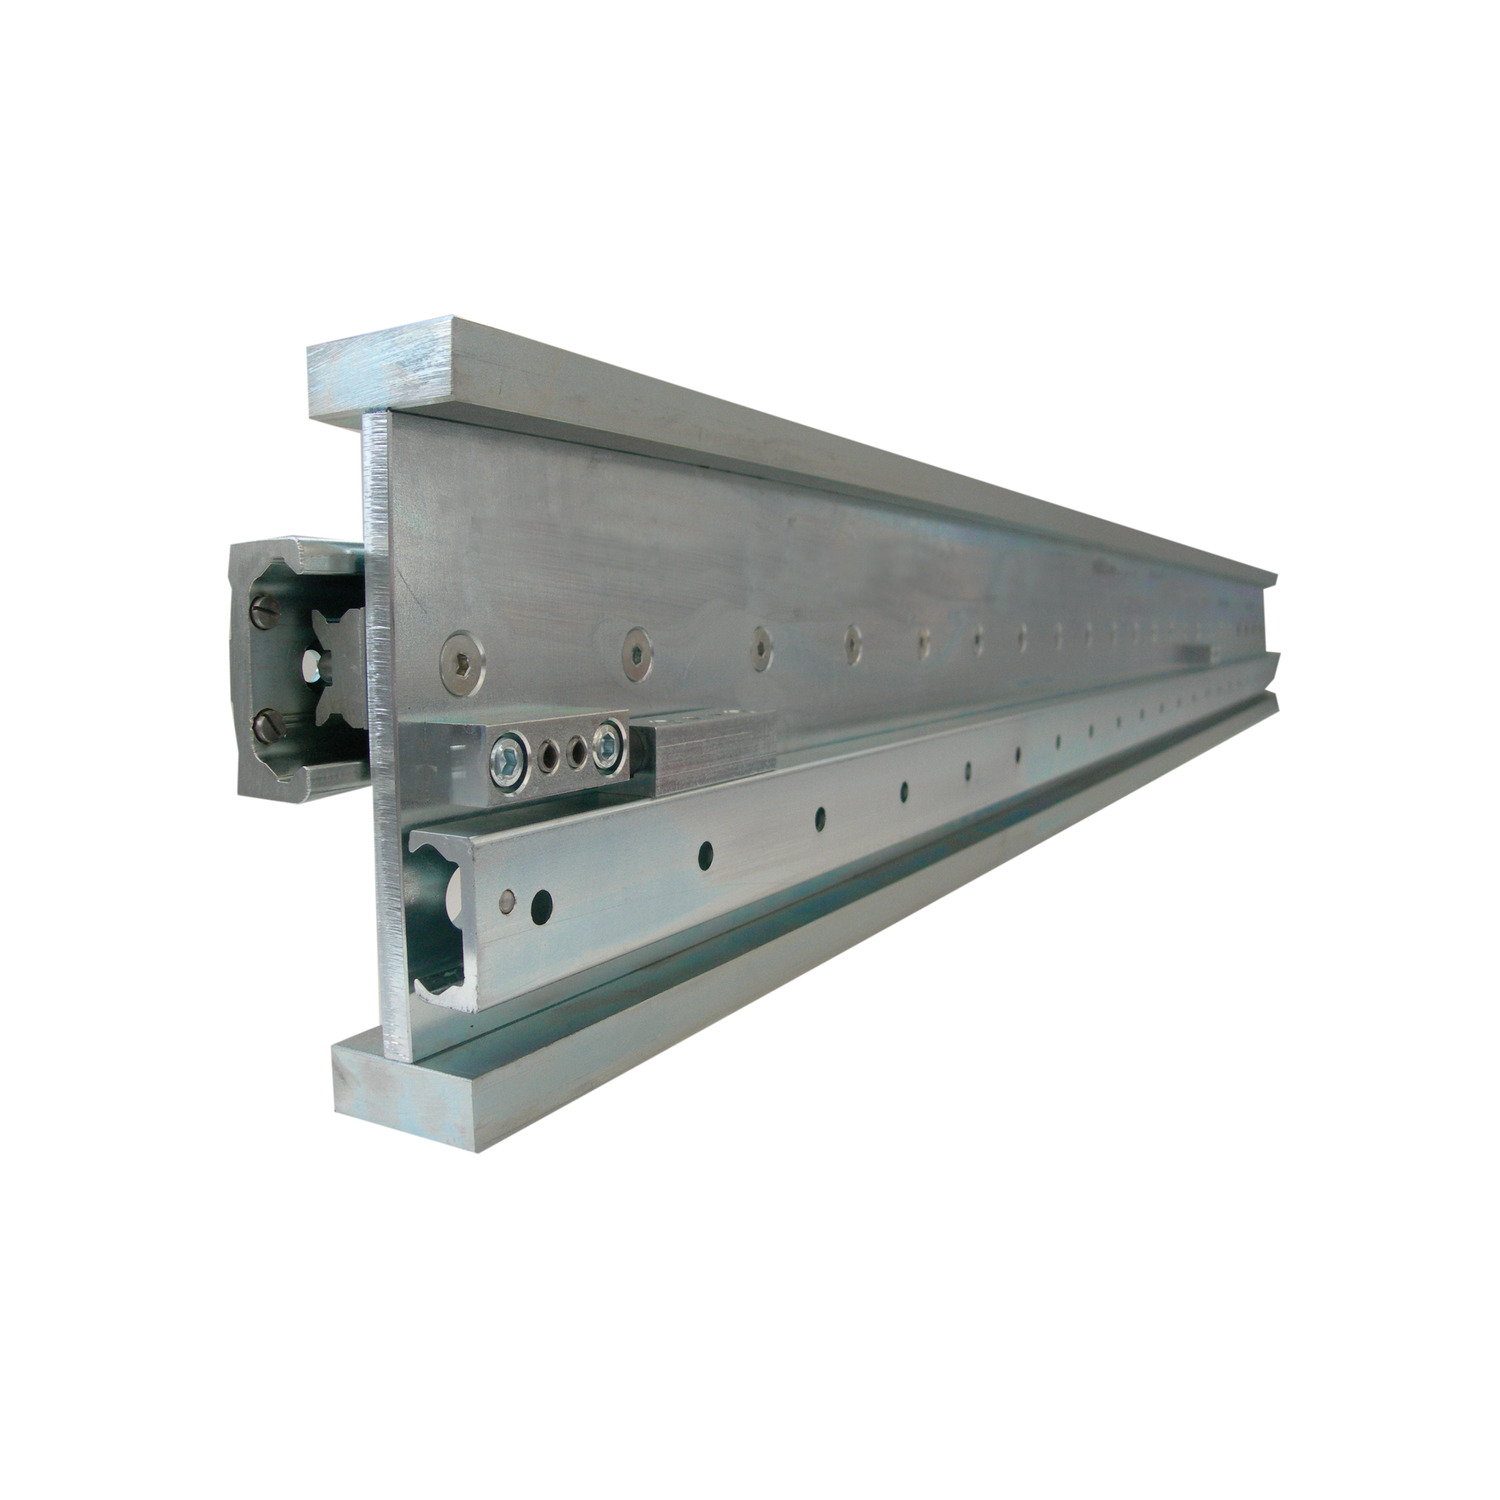 Fully Telescopic Slides Able to support heavy loads up to nearly 2000kg.